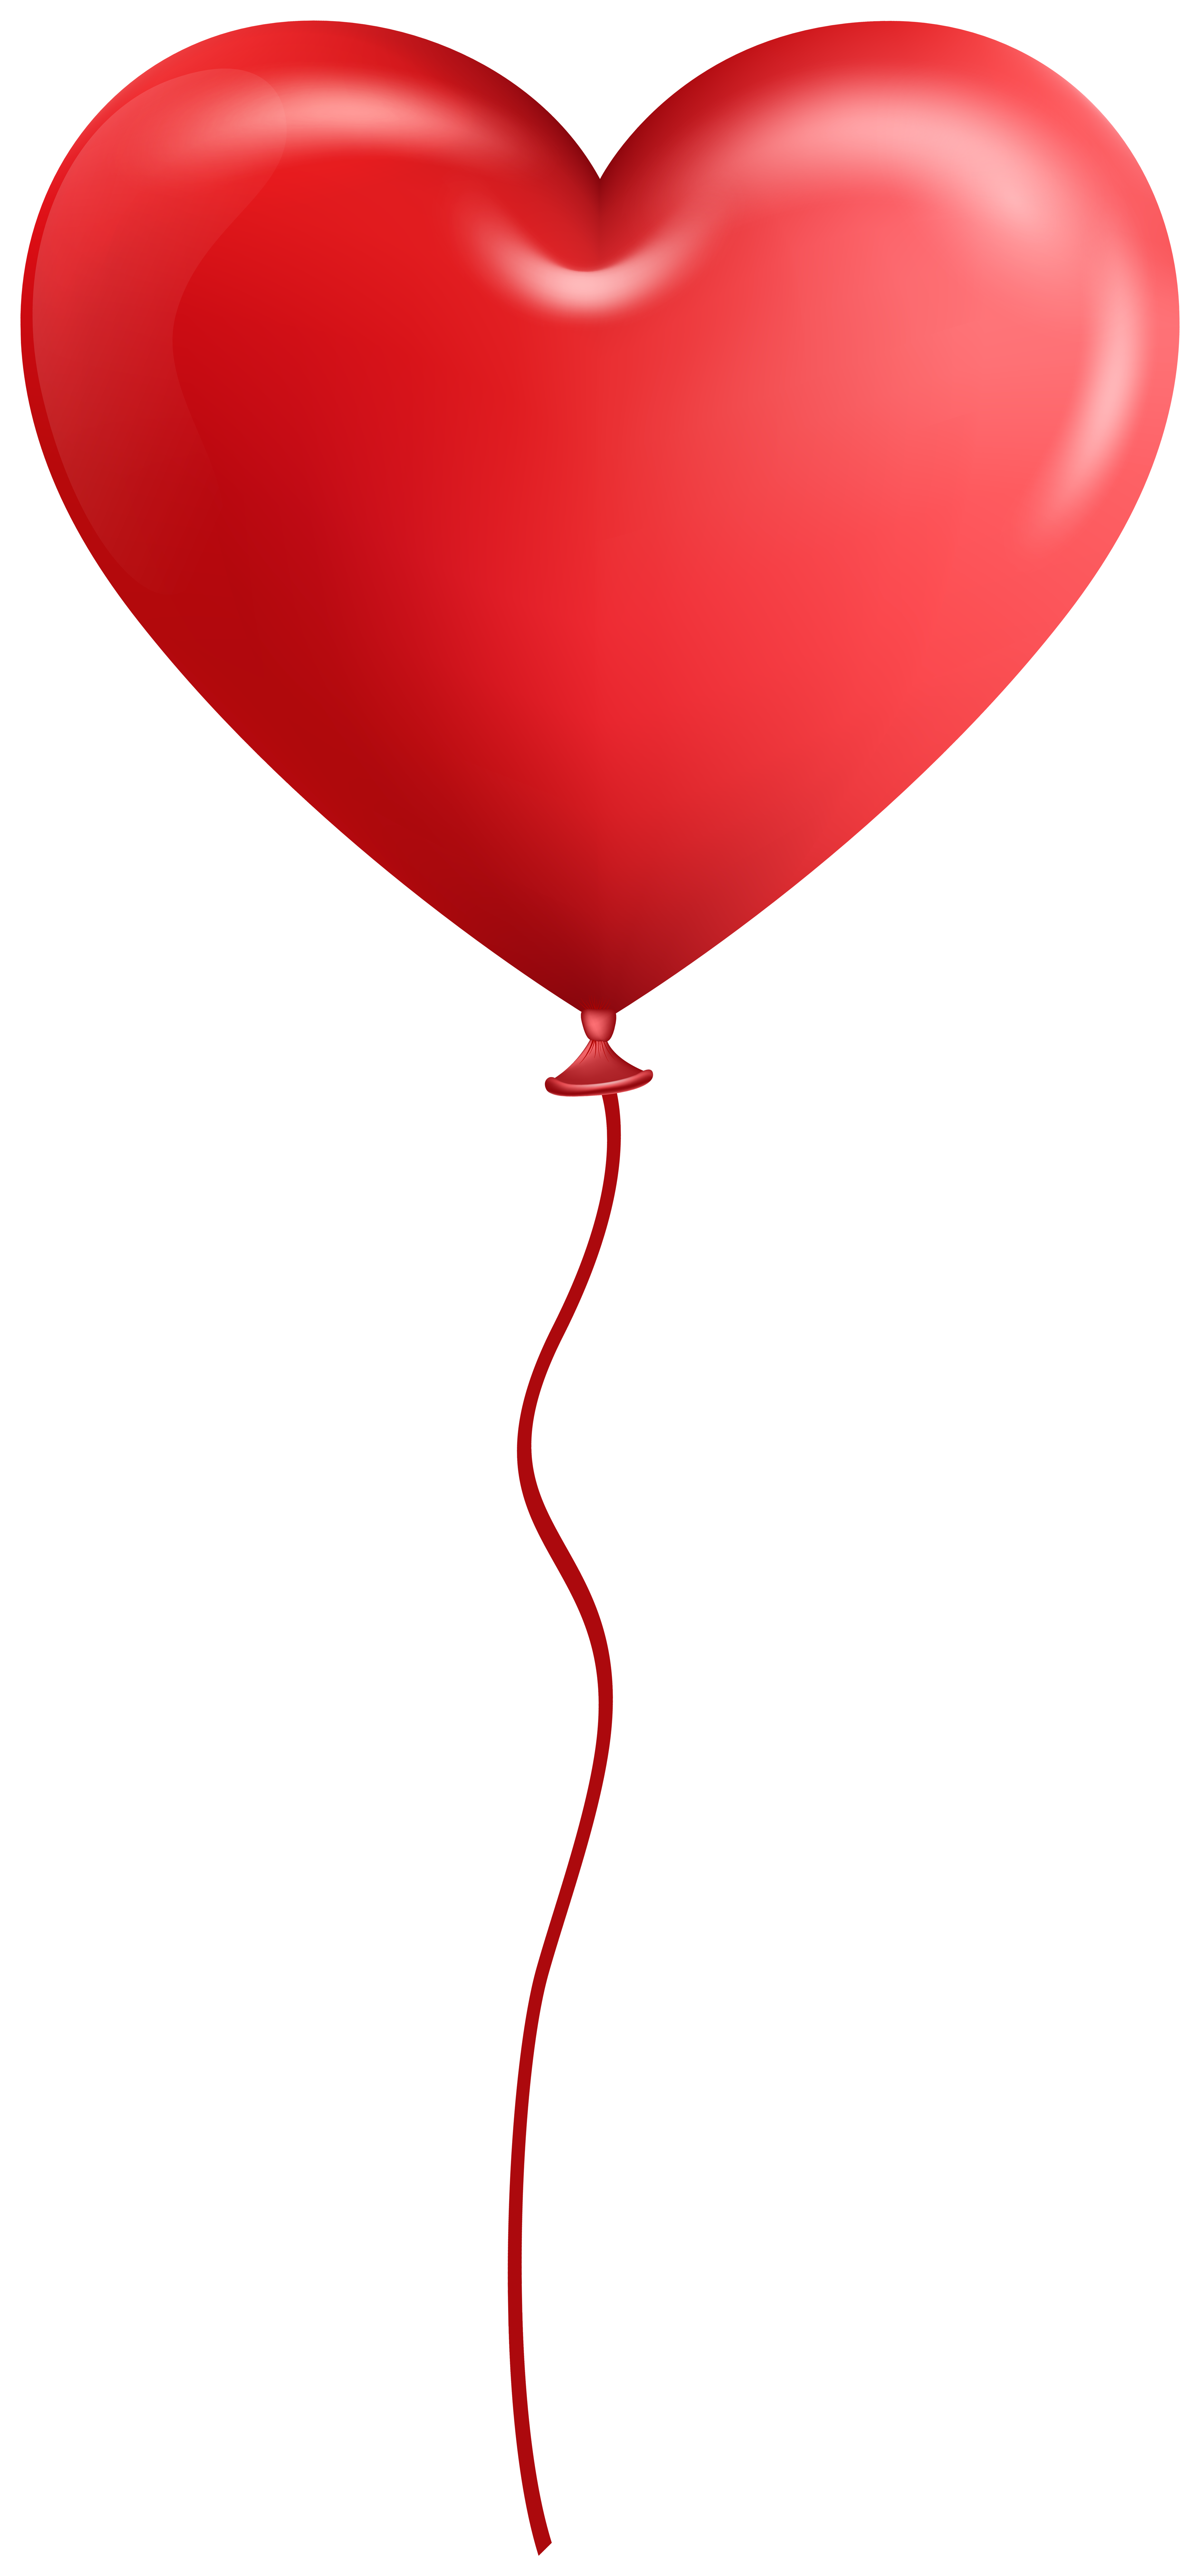 Heart Balloon Transparent PNG Image | Gallery Yopriceville - High ...